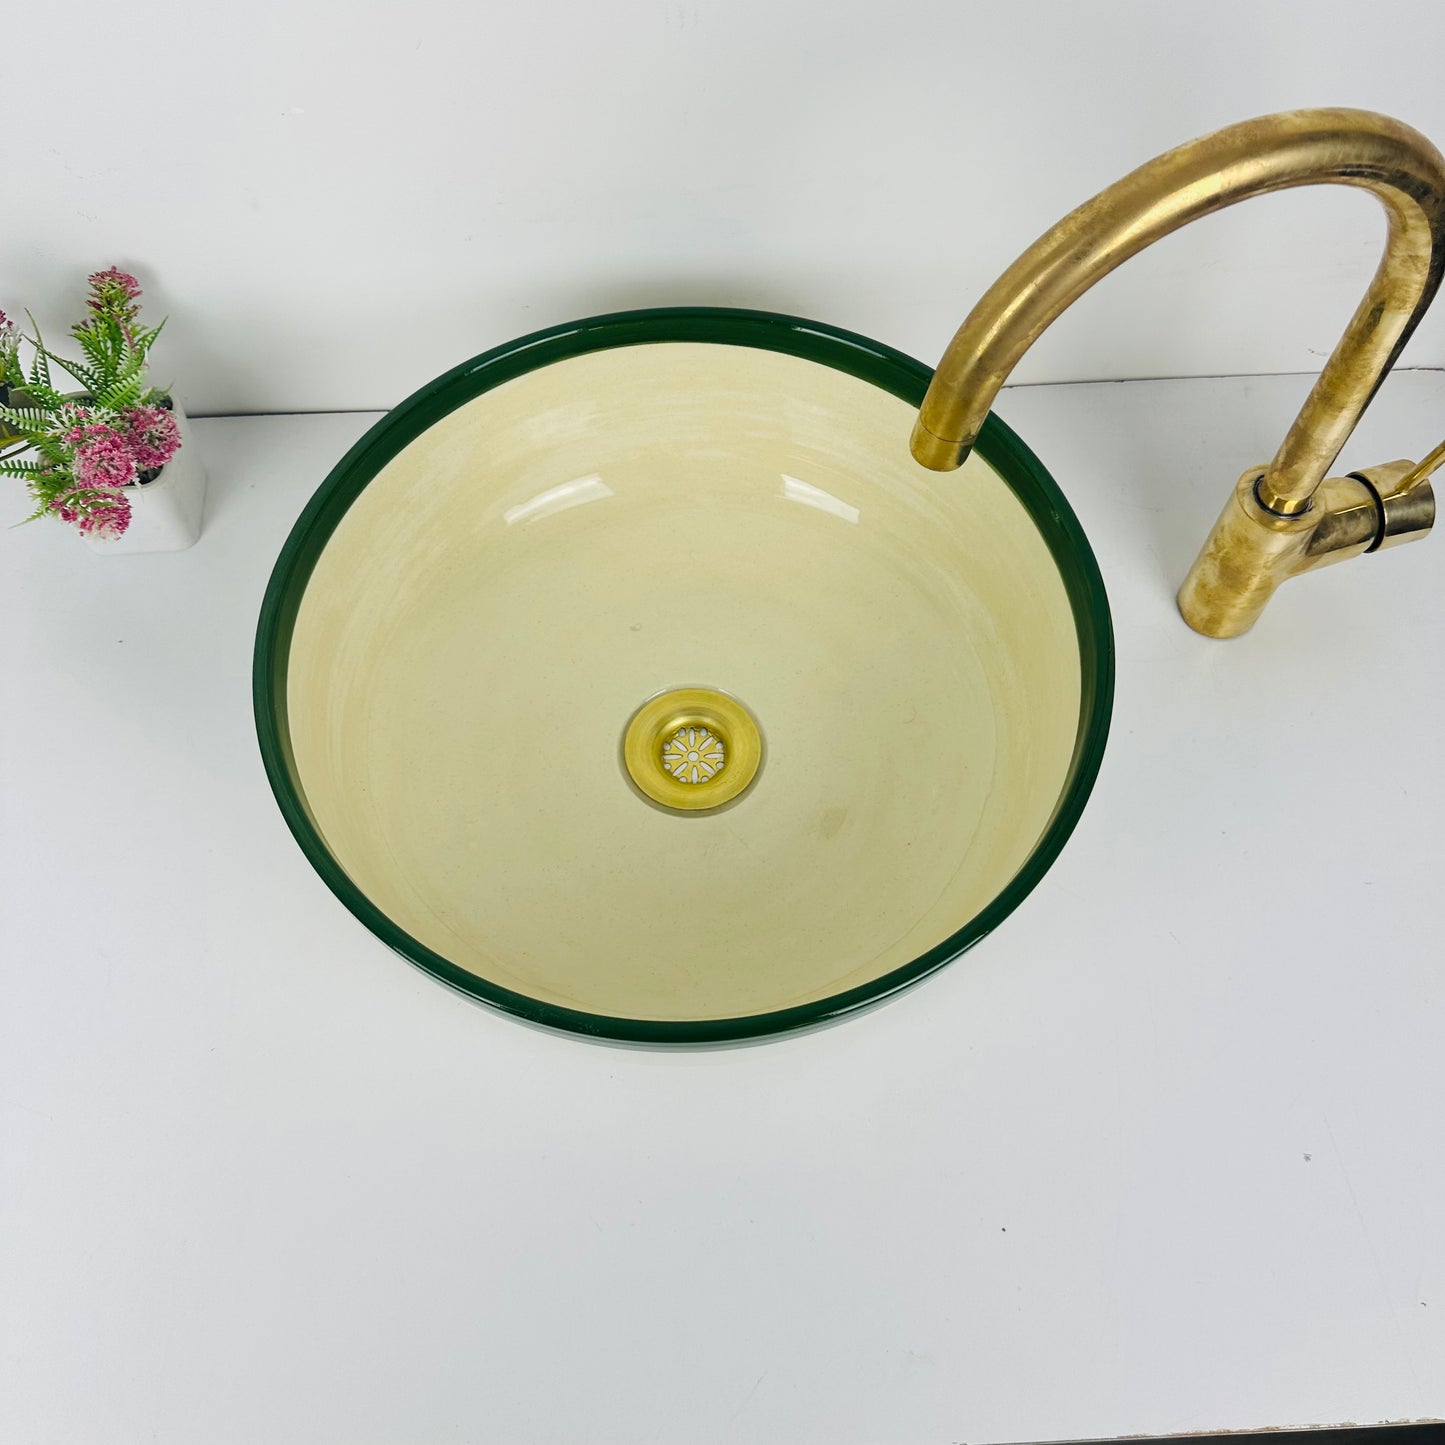 Color Crest: Handcrafted Ceramic Sink with Topped green Finish